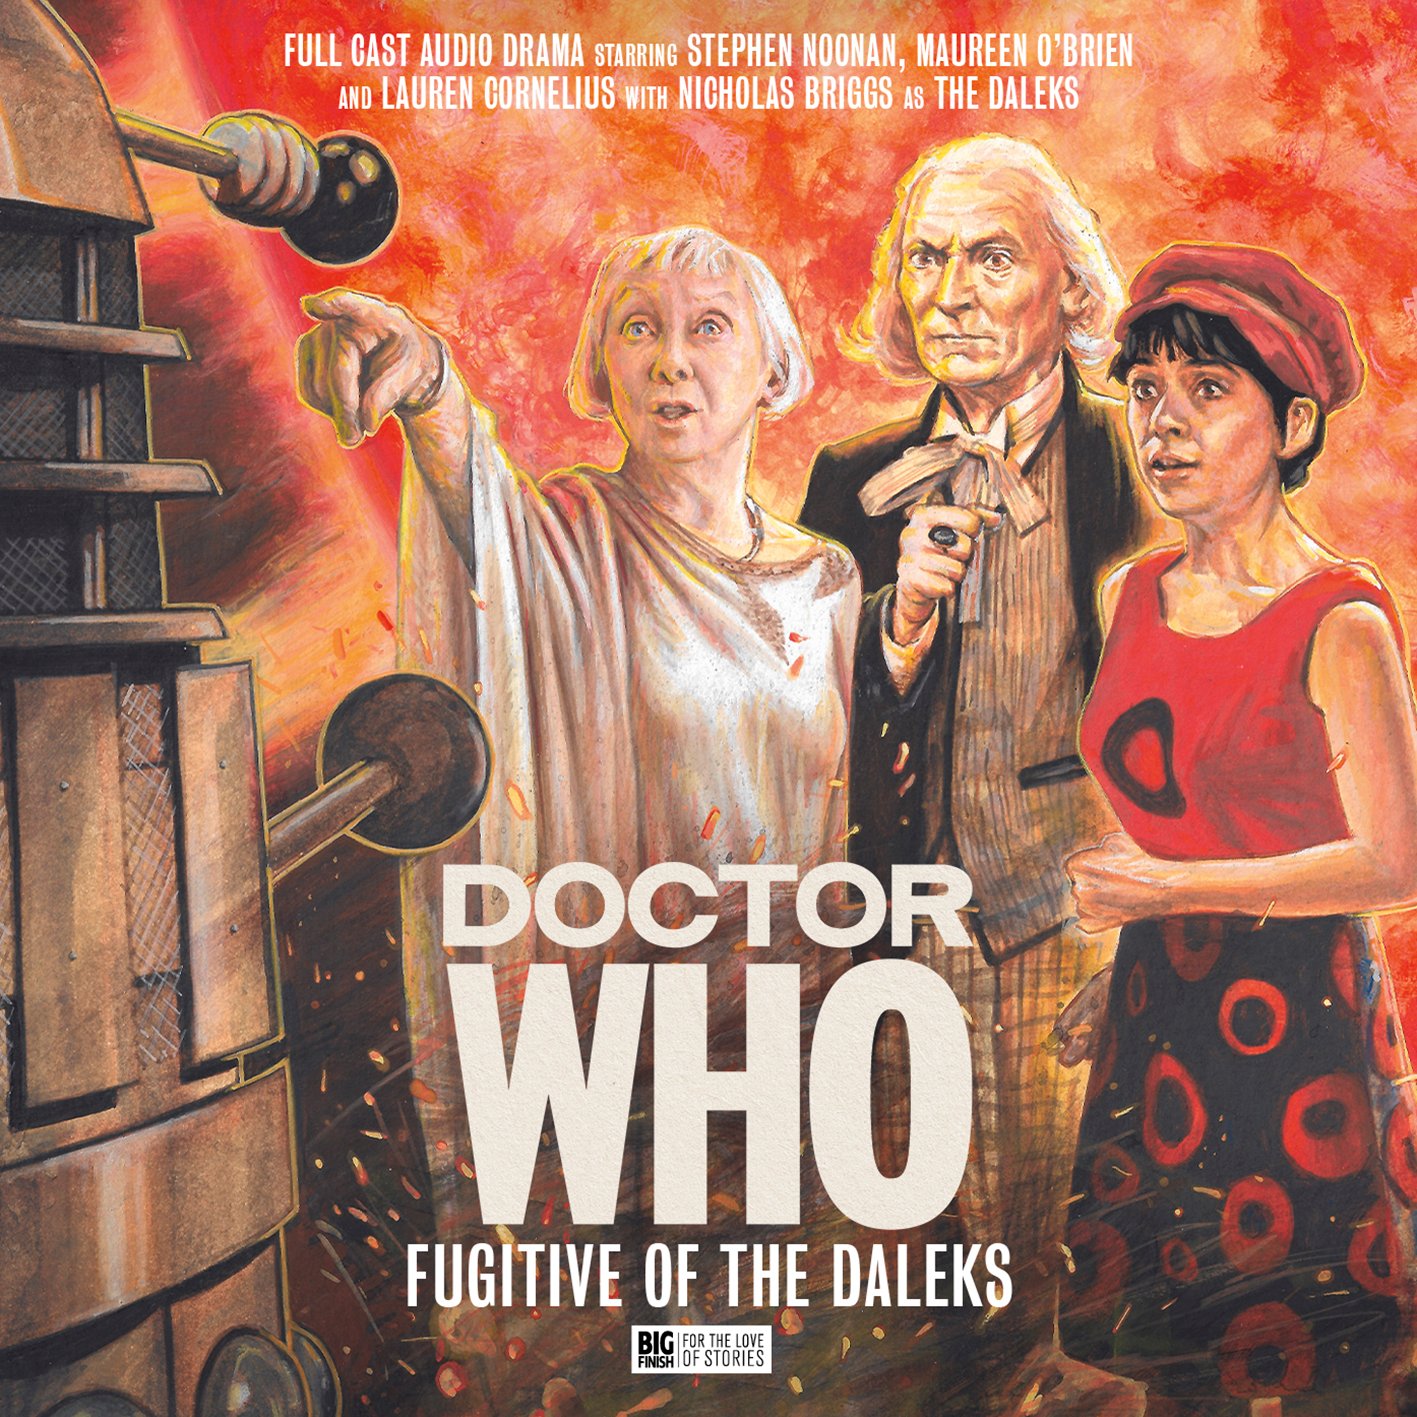 Reviewed: Big Finish’s First Doctor Adventures – Fugitive of the Daleks